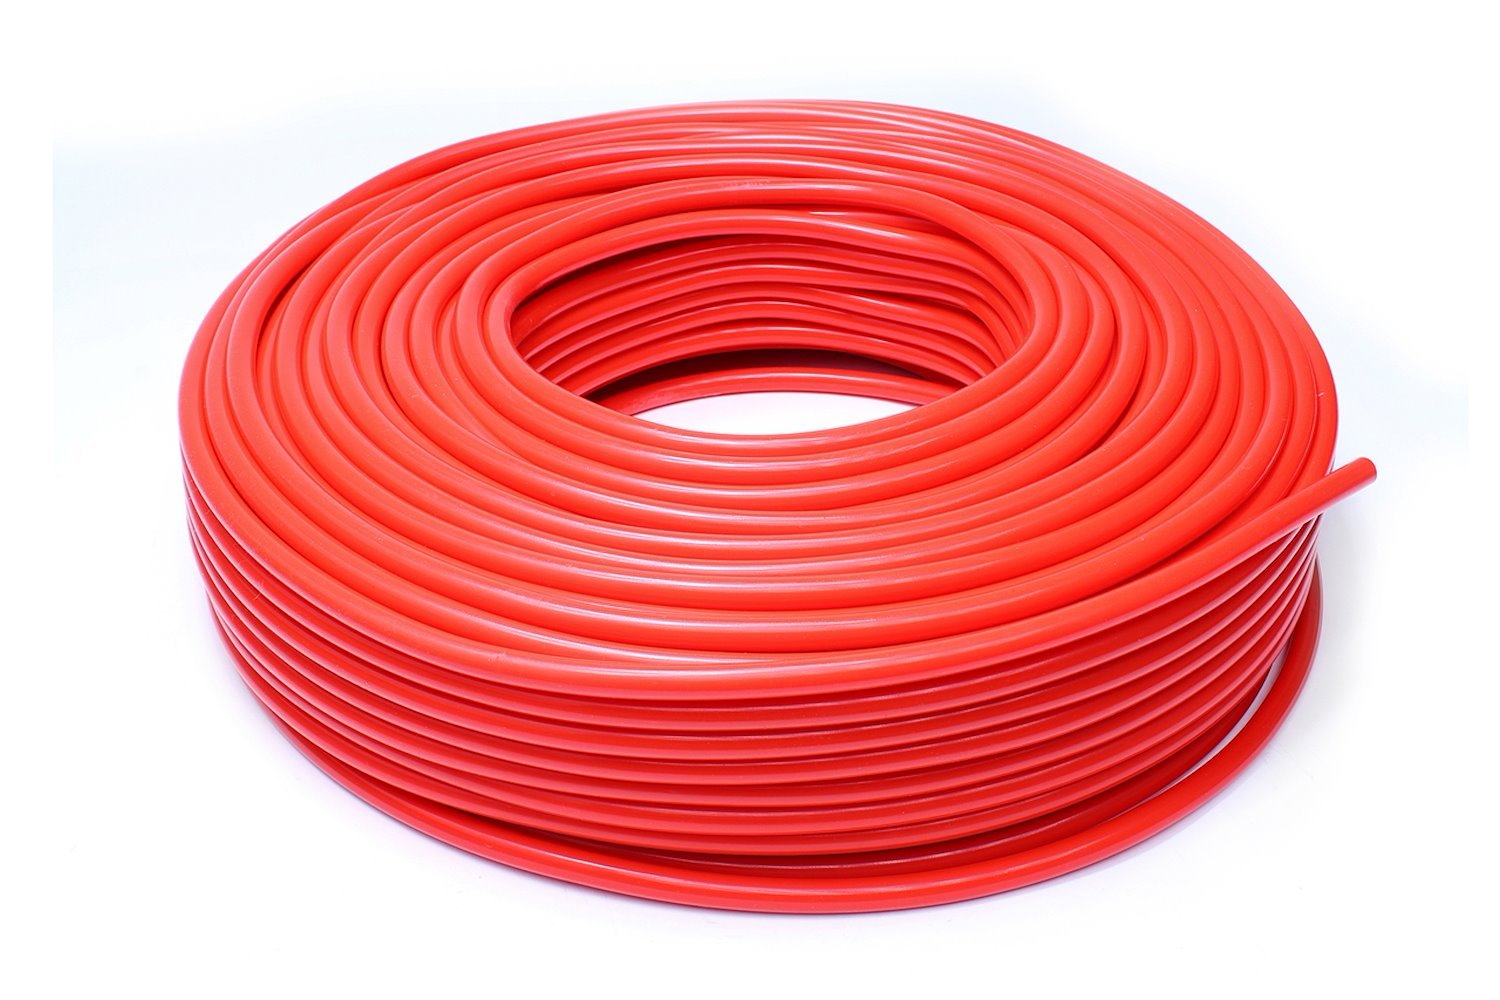 HTSVH10-REDx50 High-Temperature Silicone Vacuum Hose Tubing, 10 mm ID, 50 ft. Roll, Red